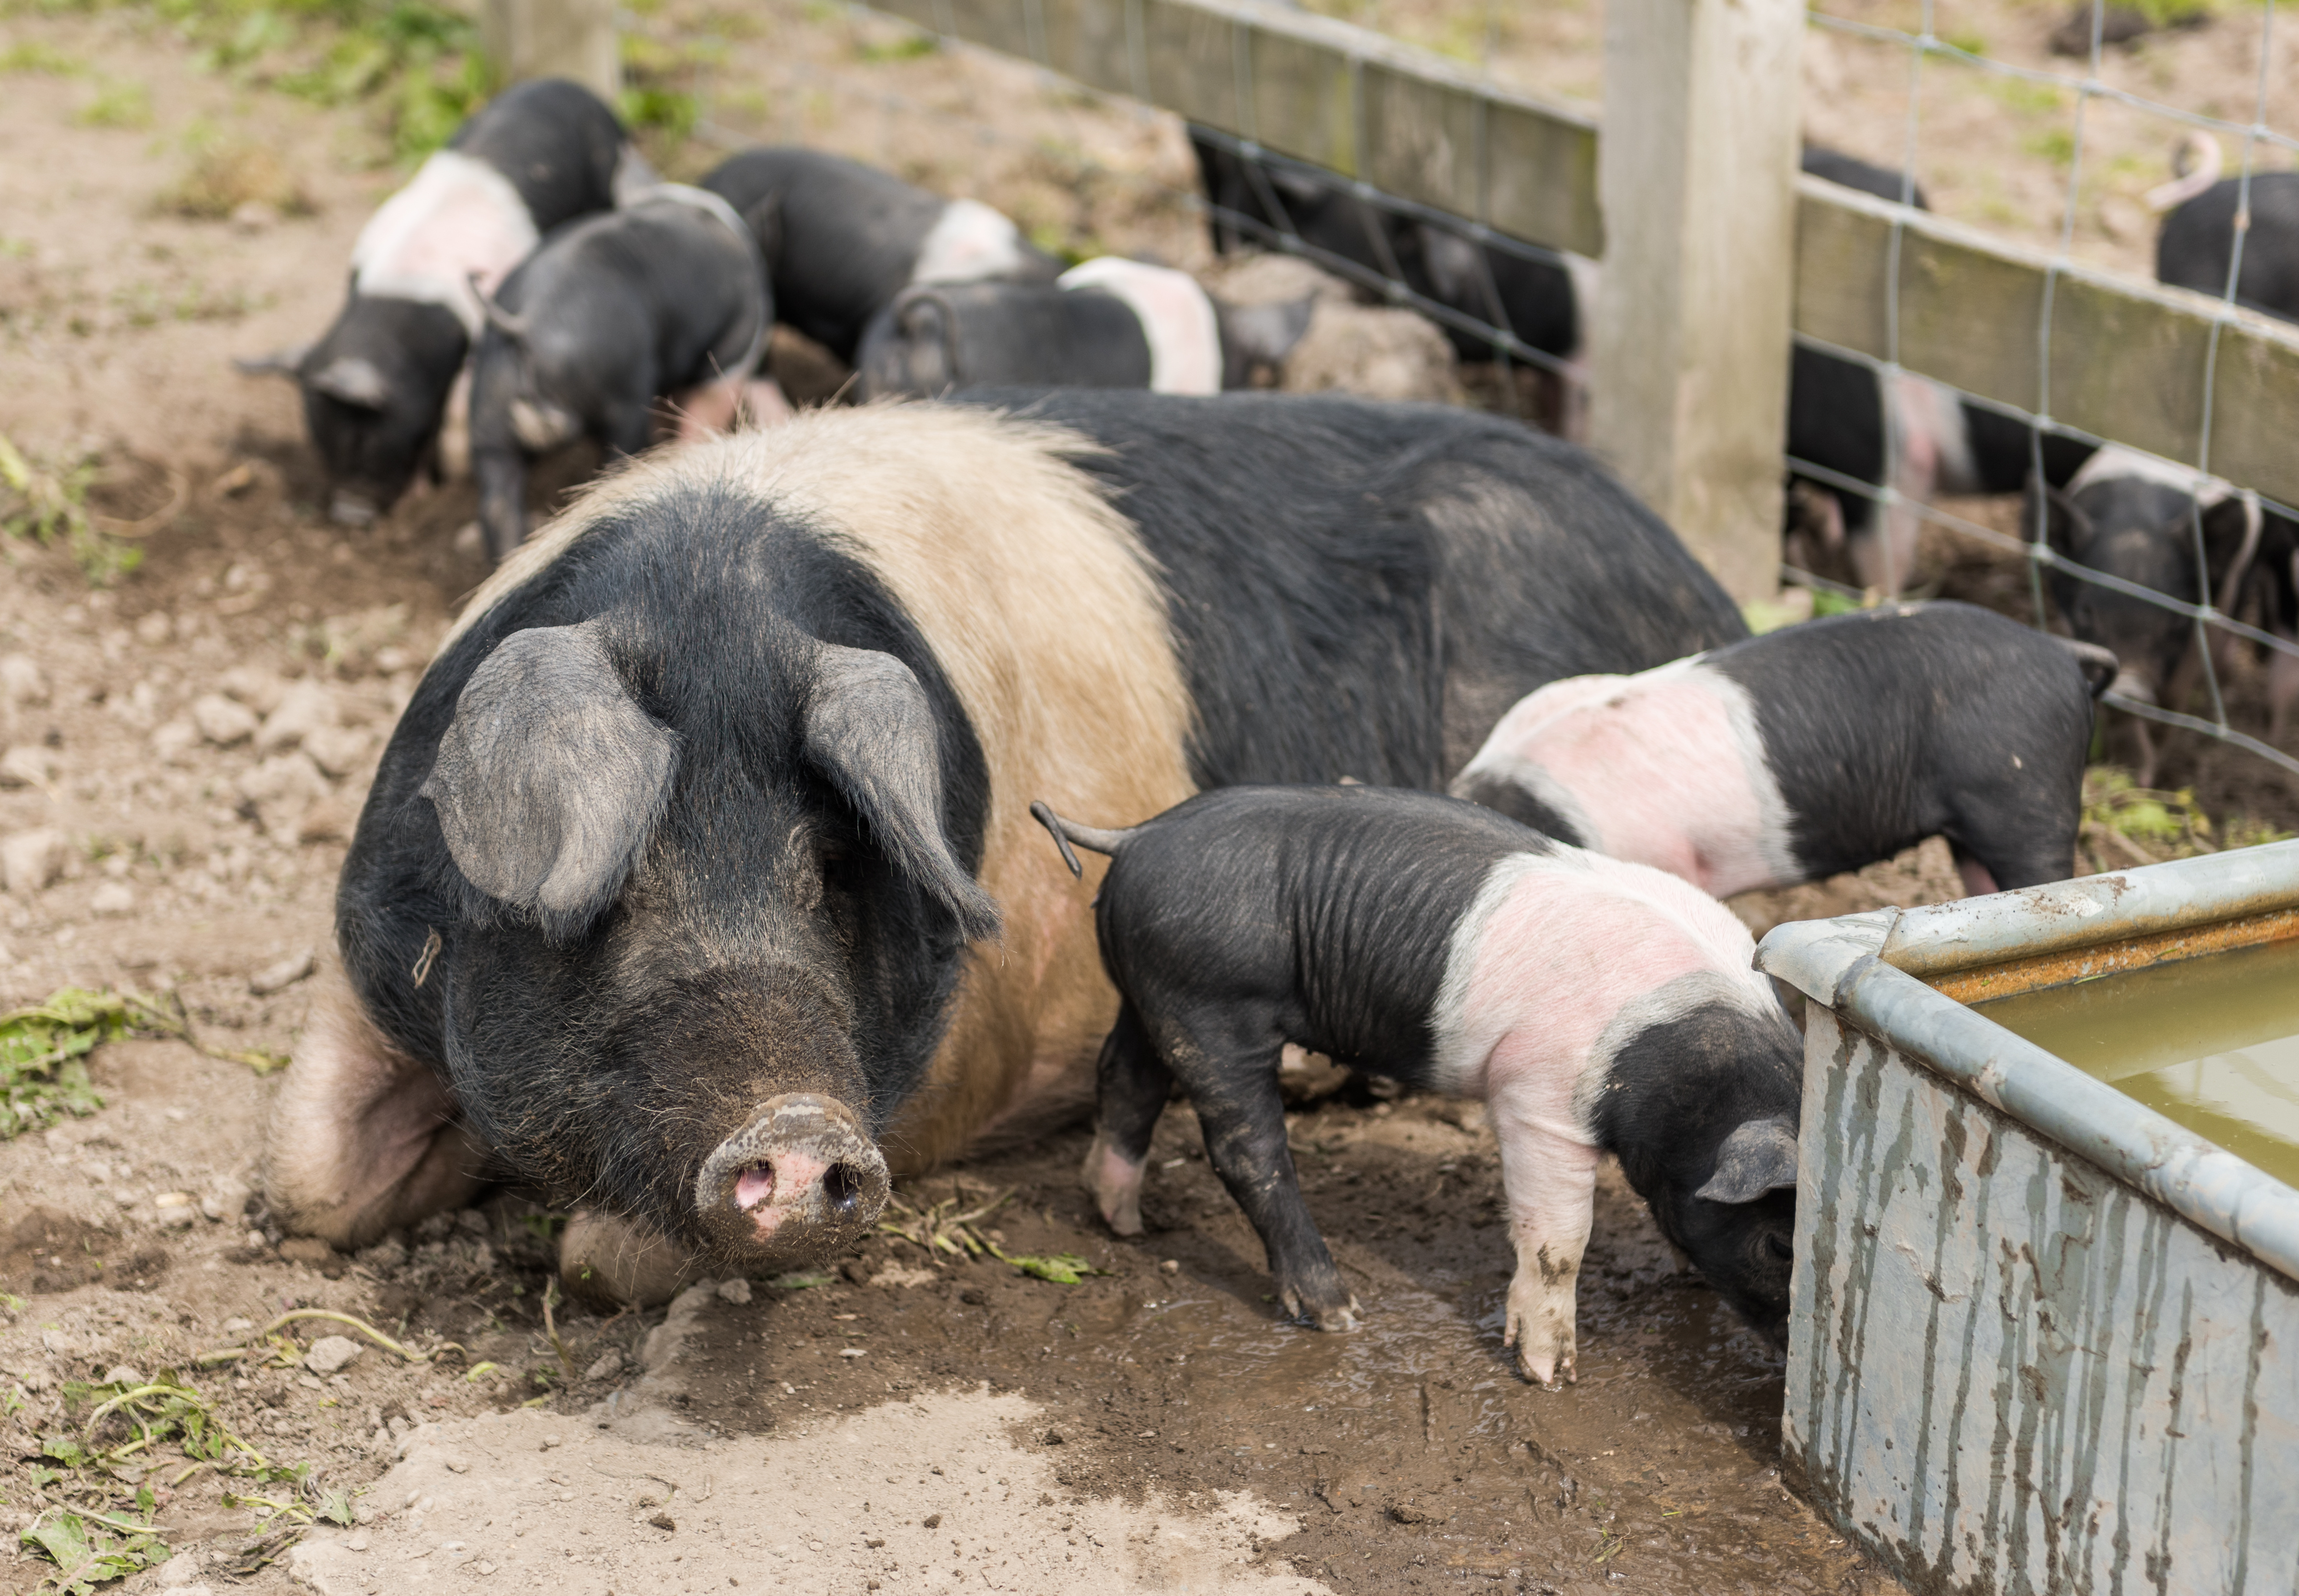 sow and piglets around a water trough outdoors